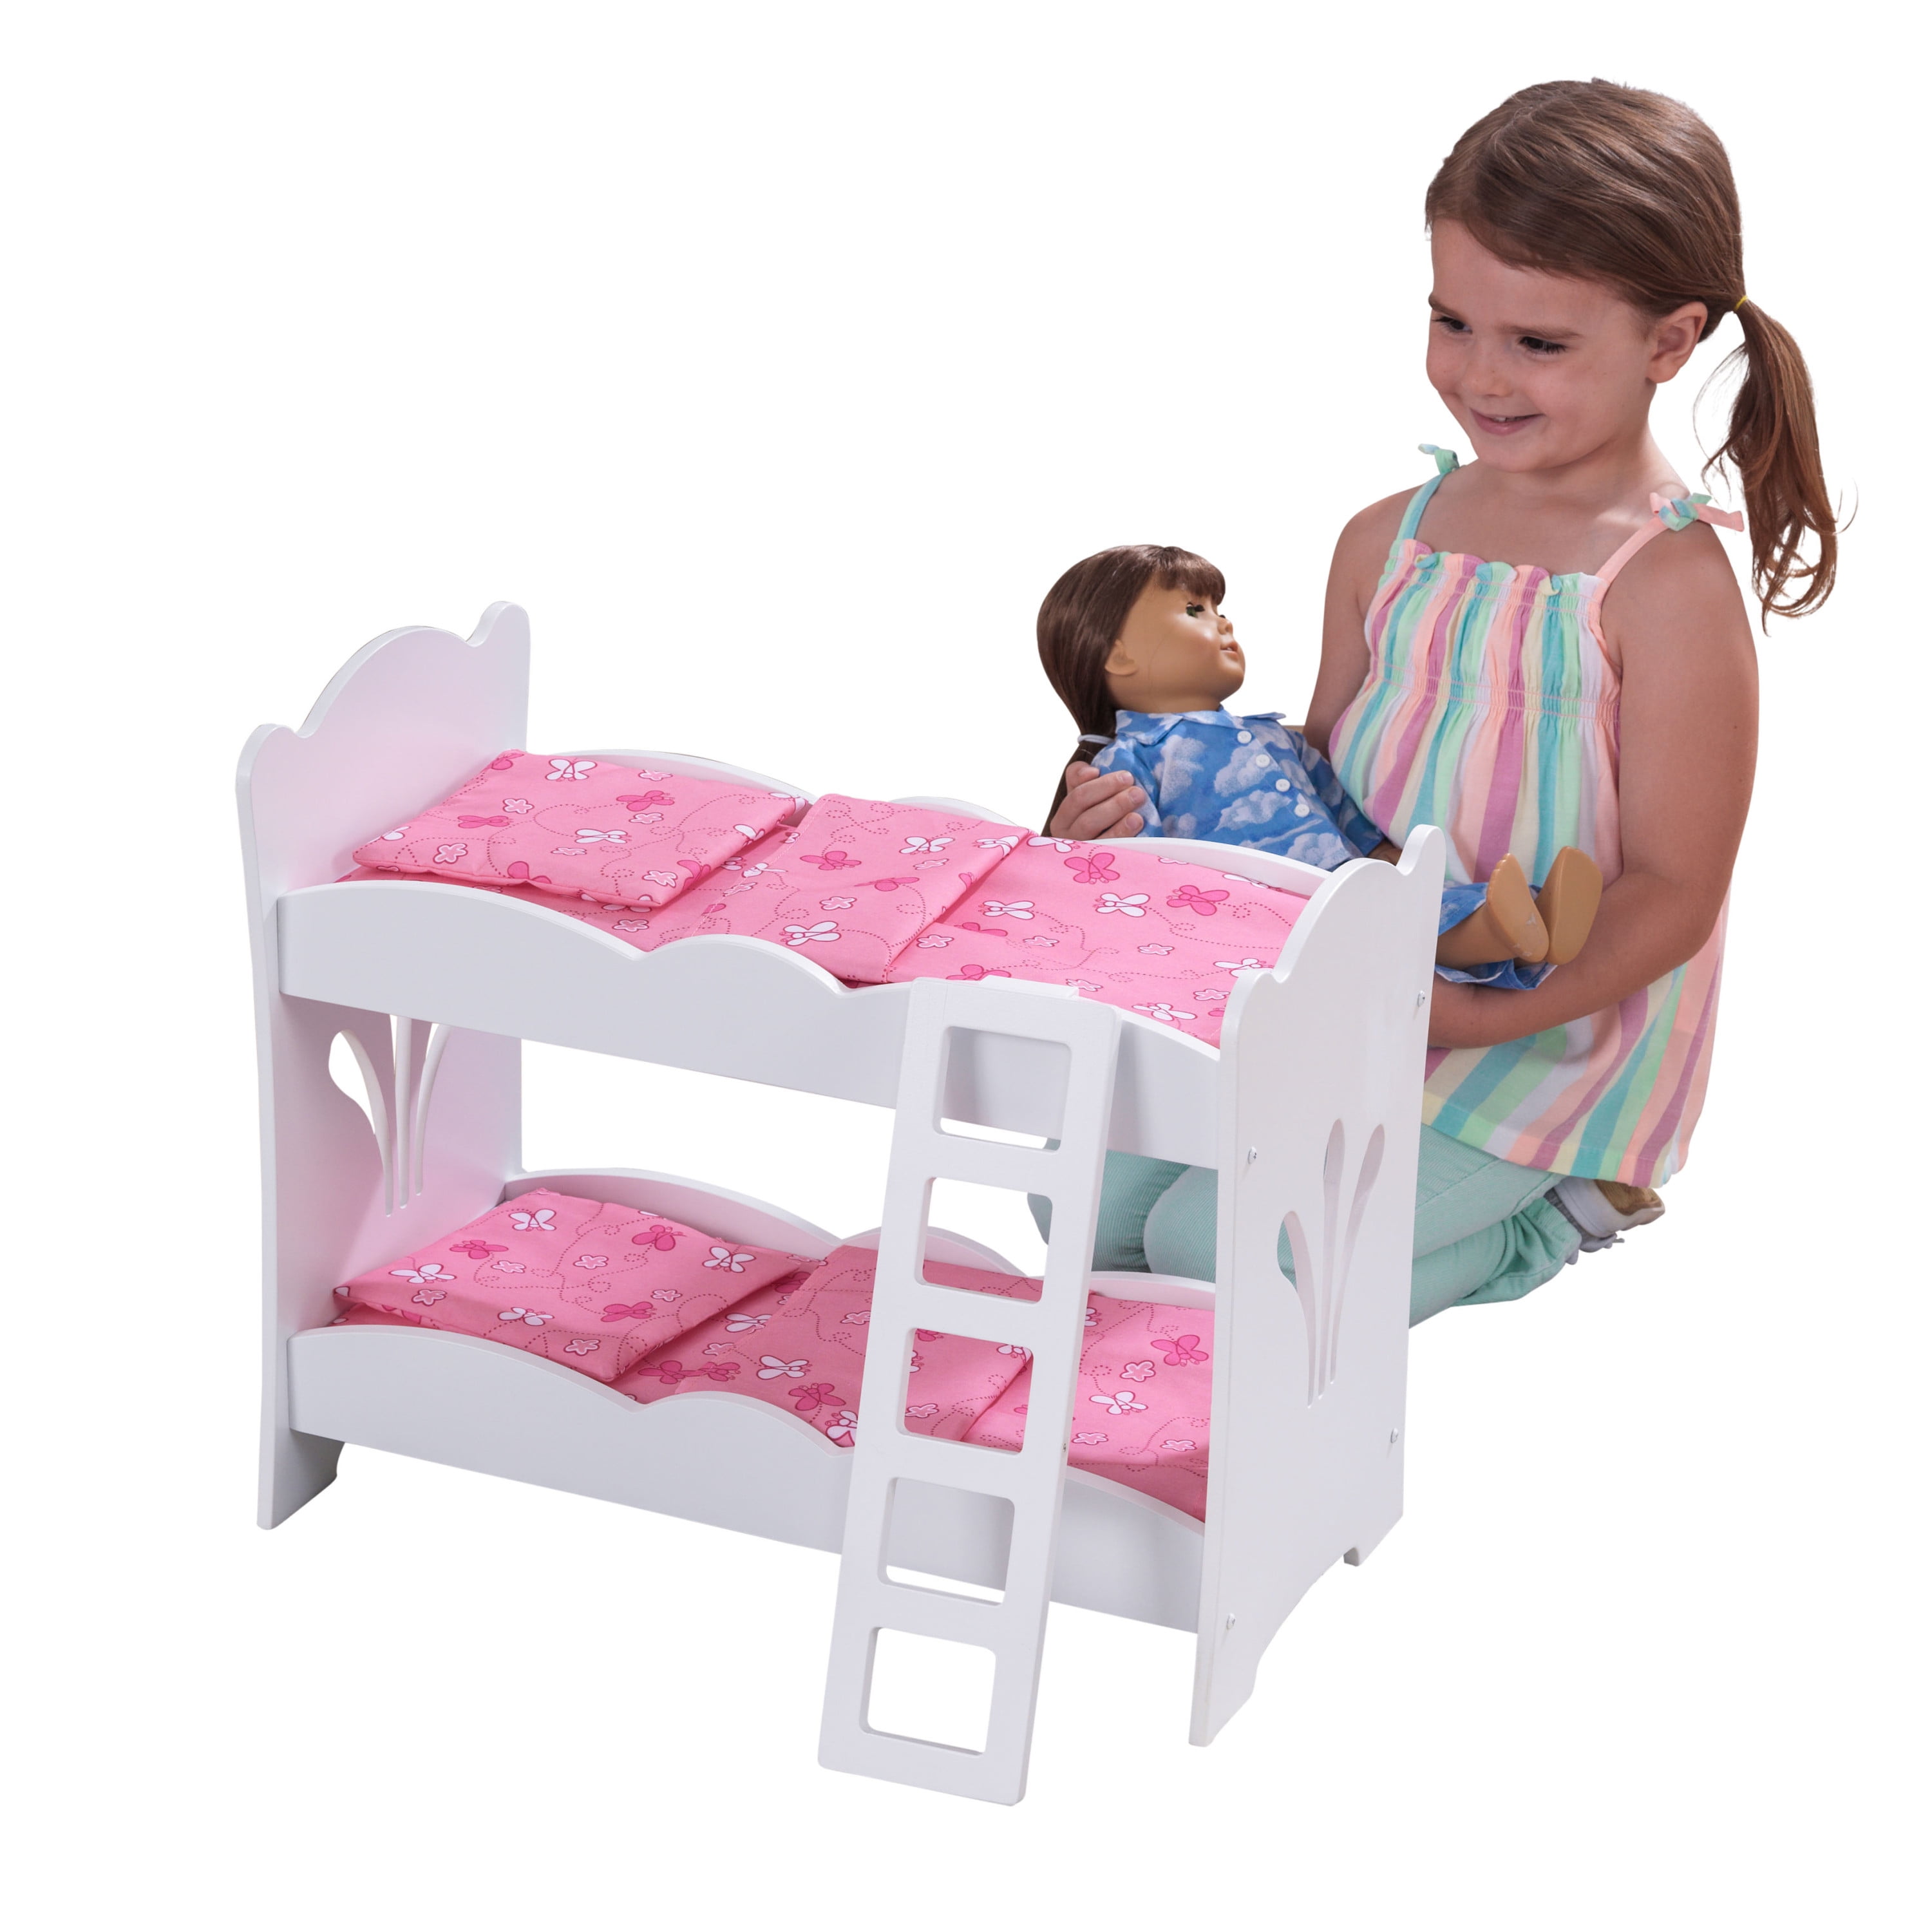 Kidkraft Wooden Lil Doll Bunk Bed With, Toddler Infant Bunk Bed